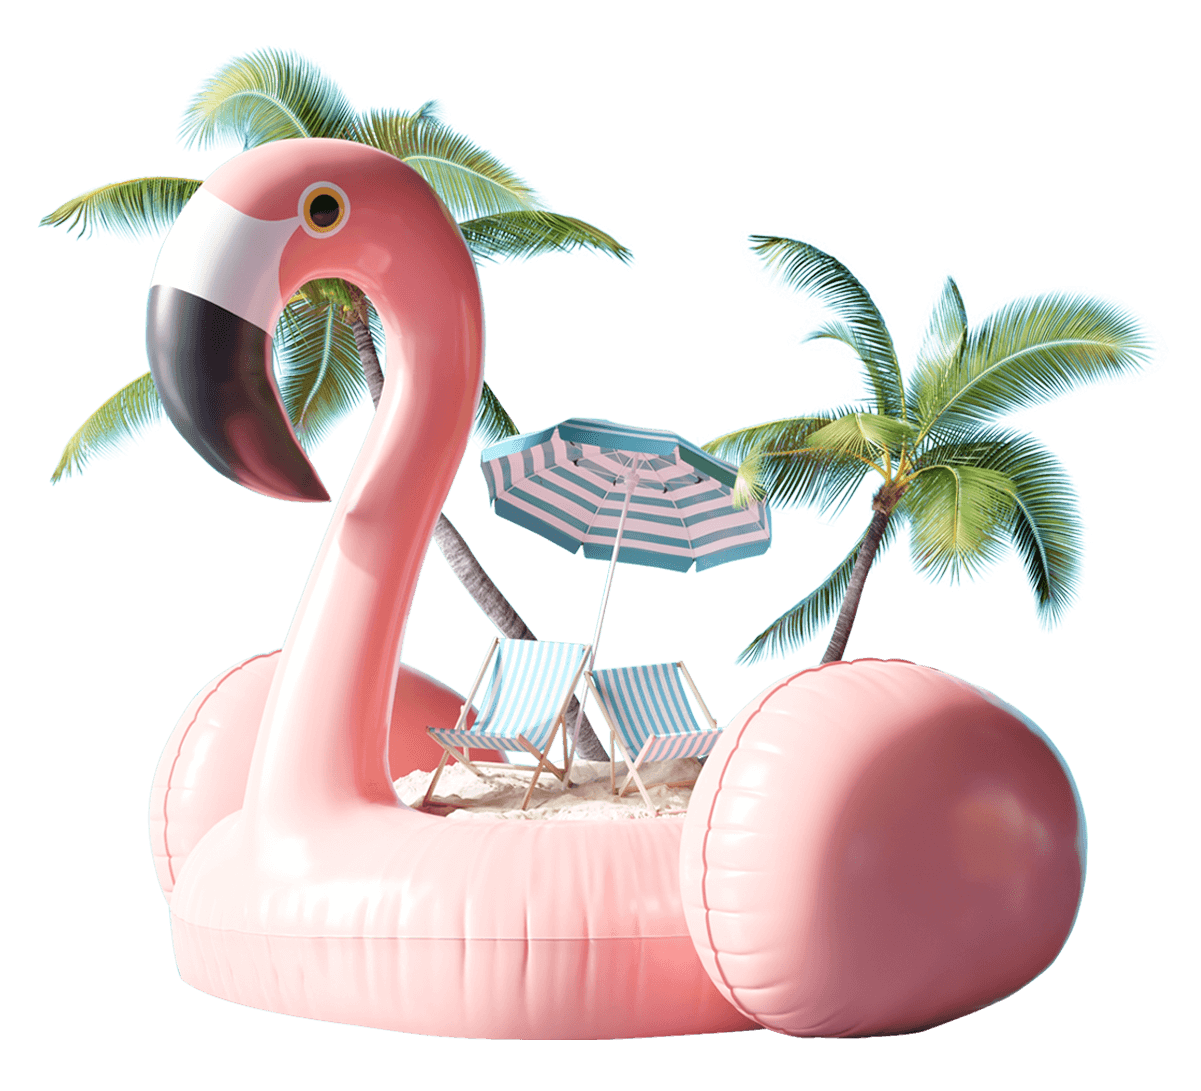 Image of an inflatable pink flamingo with a beach setting inside